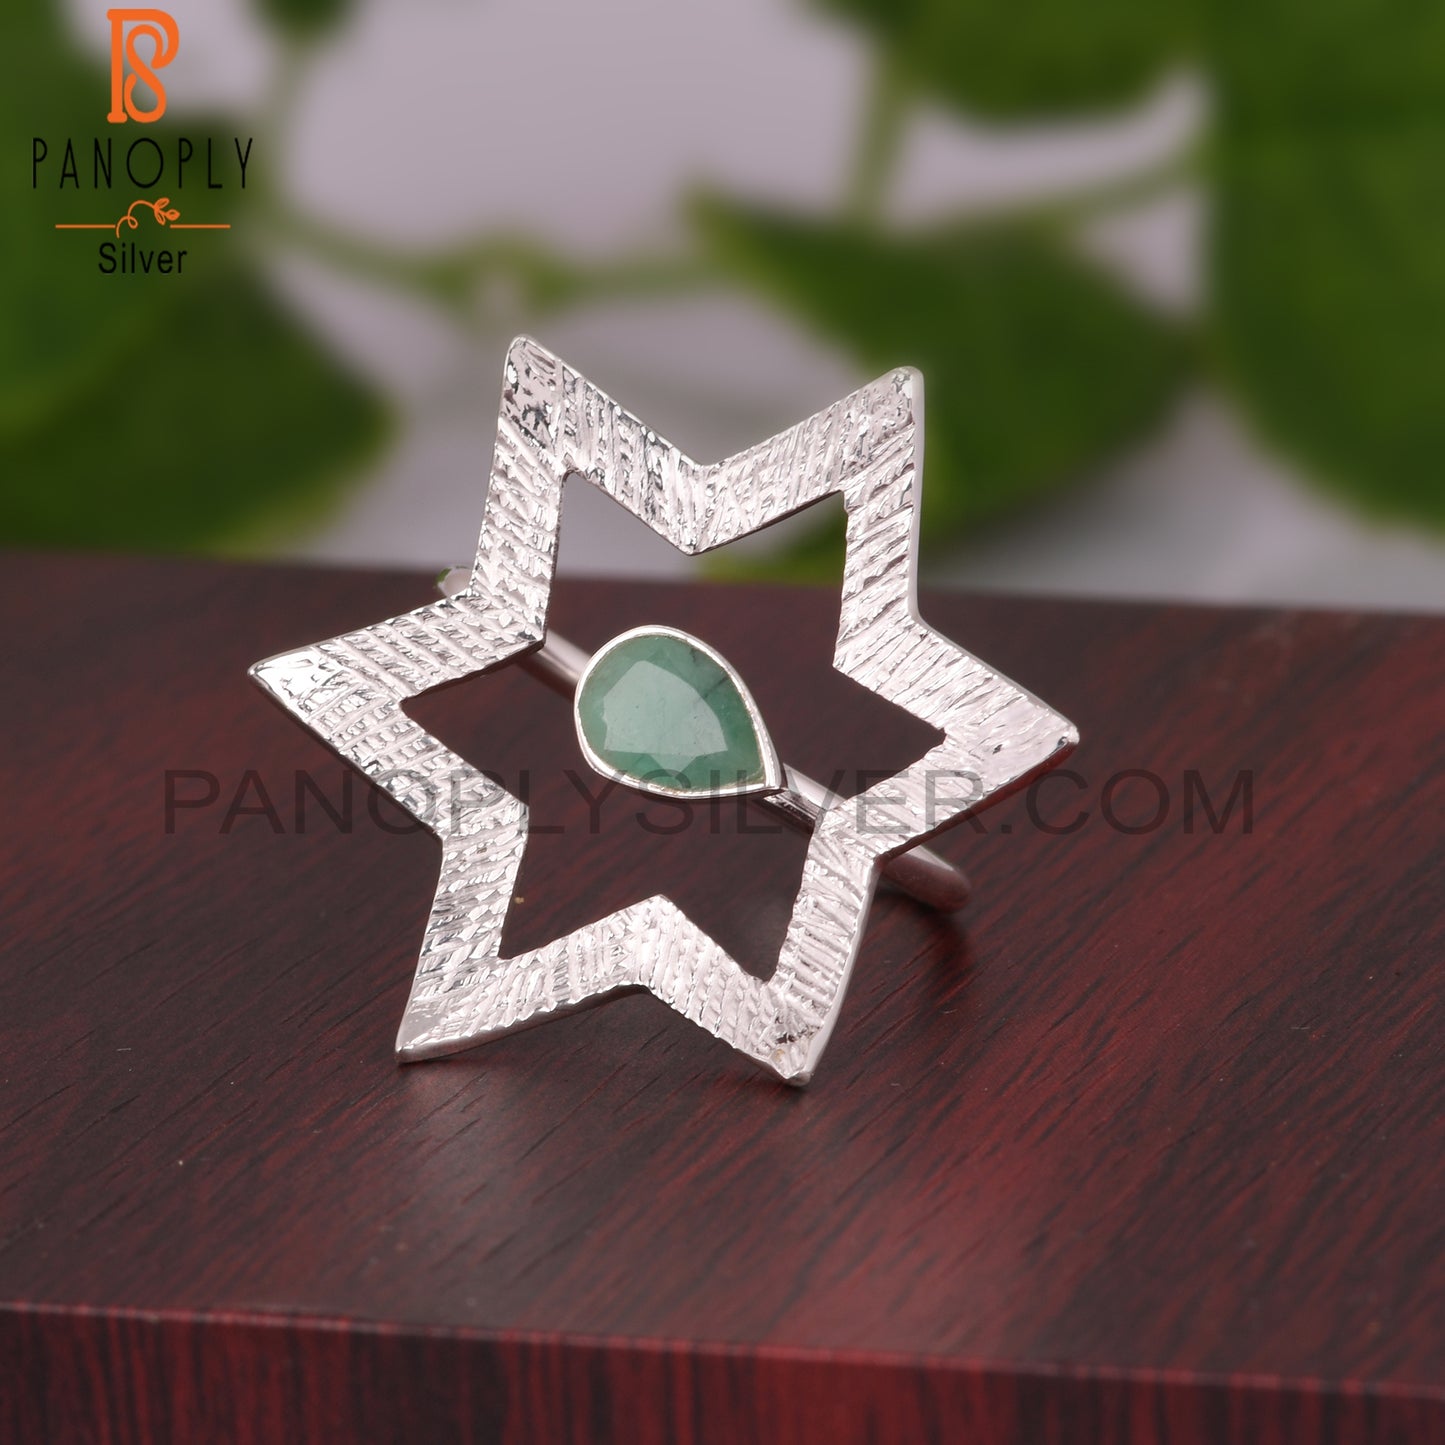 Emerald Cute 925 Sterling Silver Dainty Ring